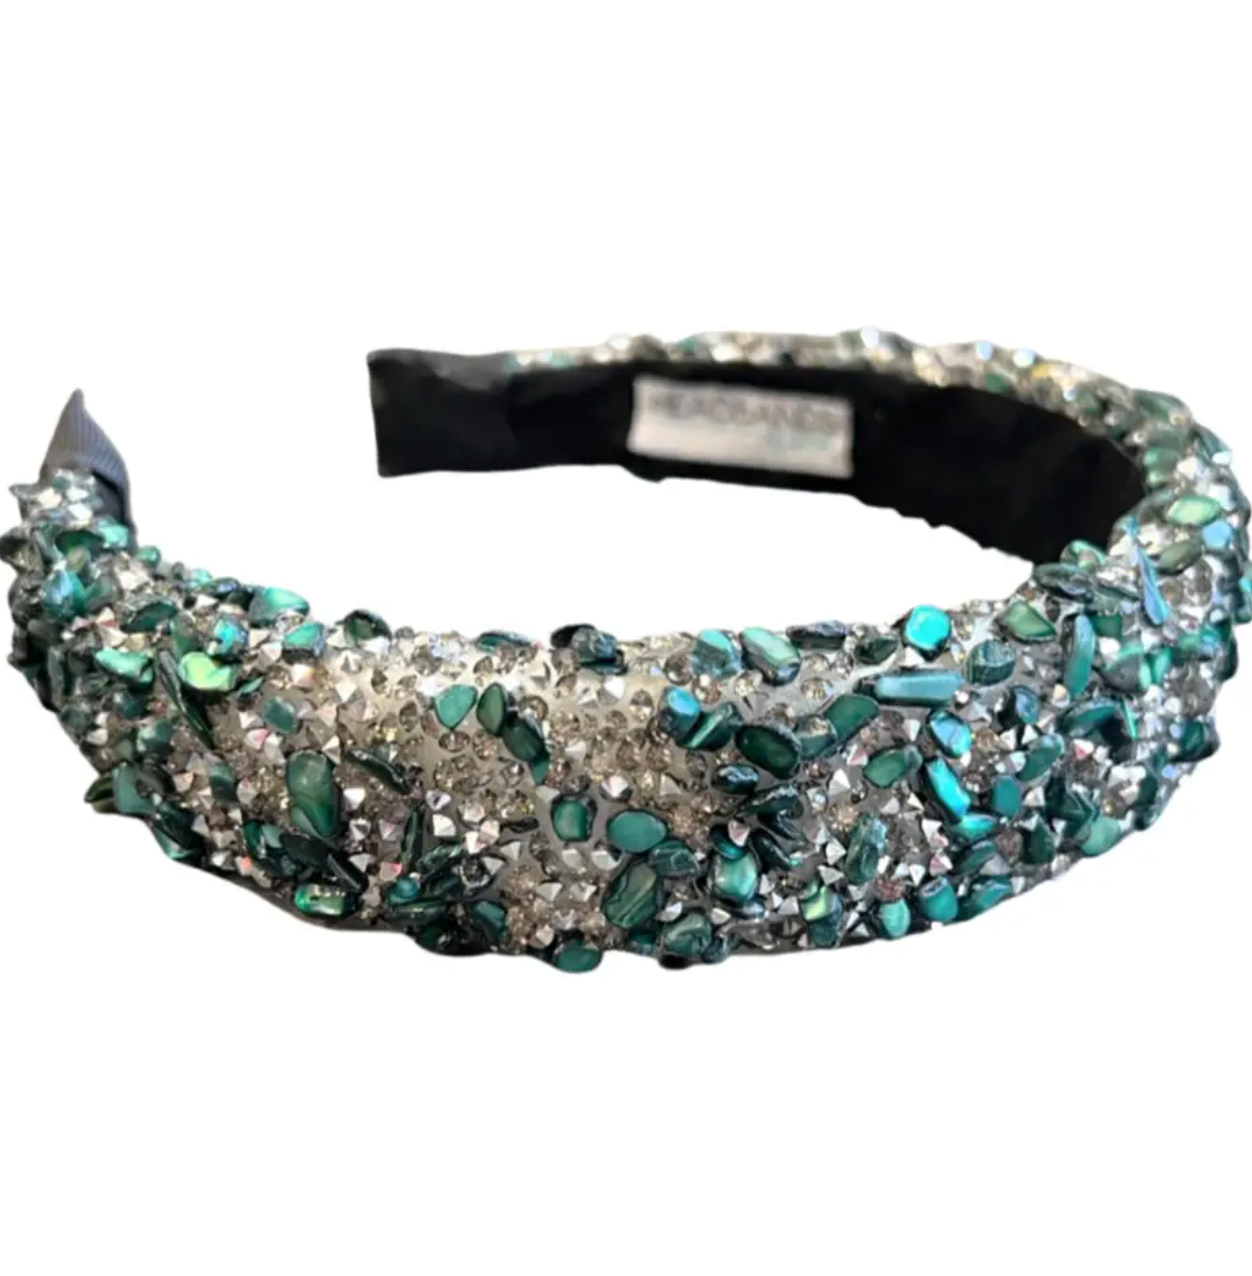 All That Glitters Forest Green & Silver Headband